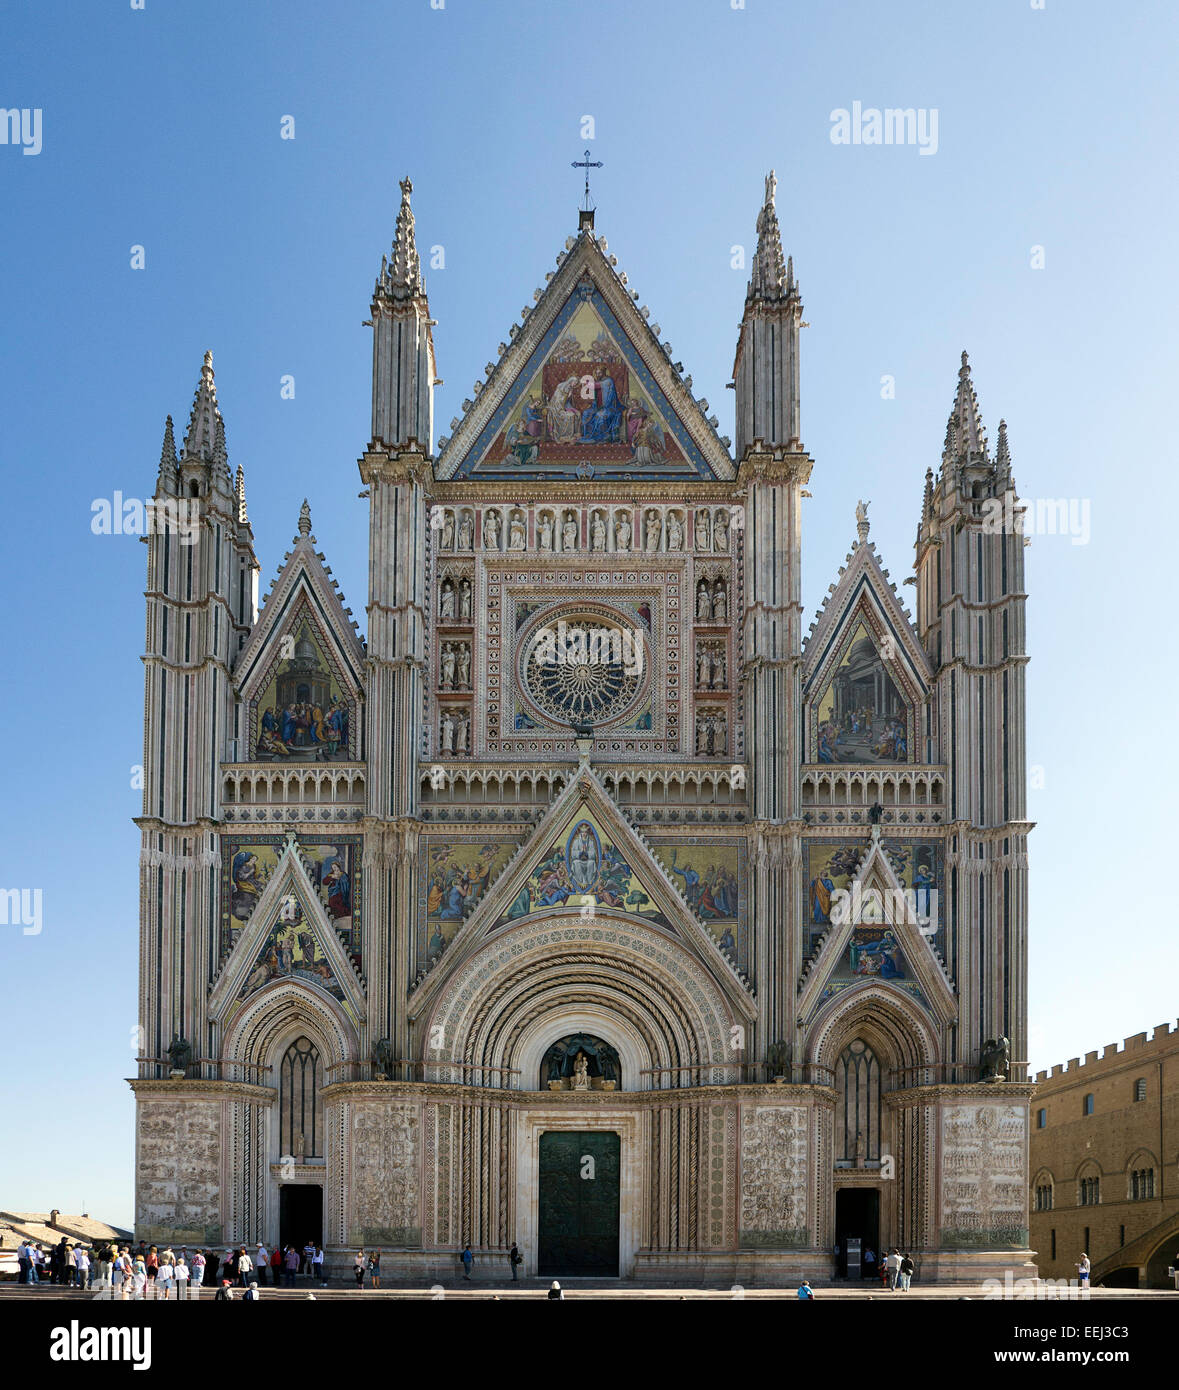 The gothic west front (facade) of Orvieto cathedral in Orvieto, Umbria, Italy. Largely built in the 14th Century. Stock Photo